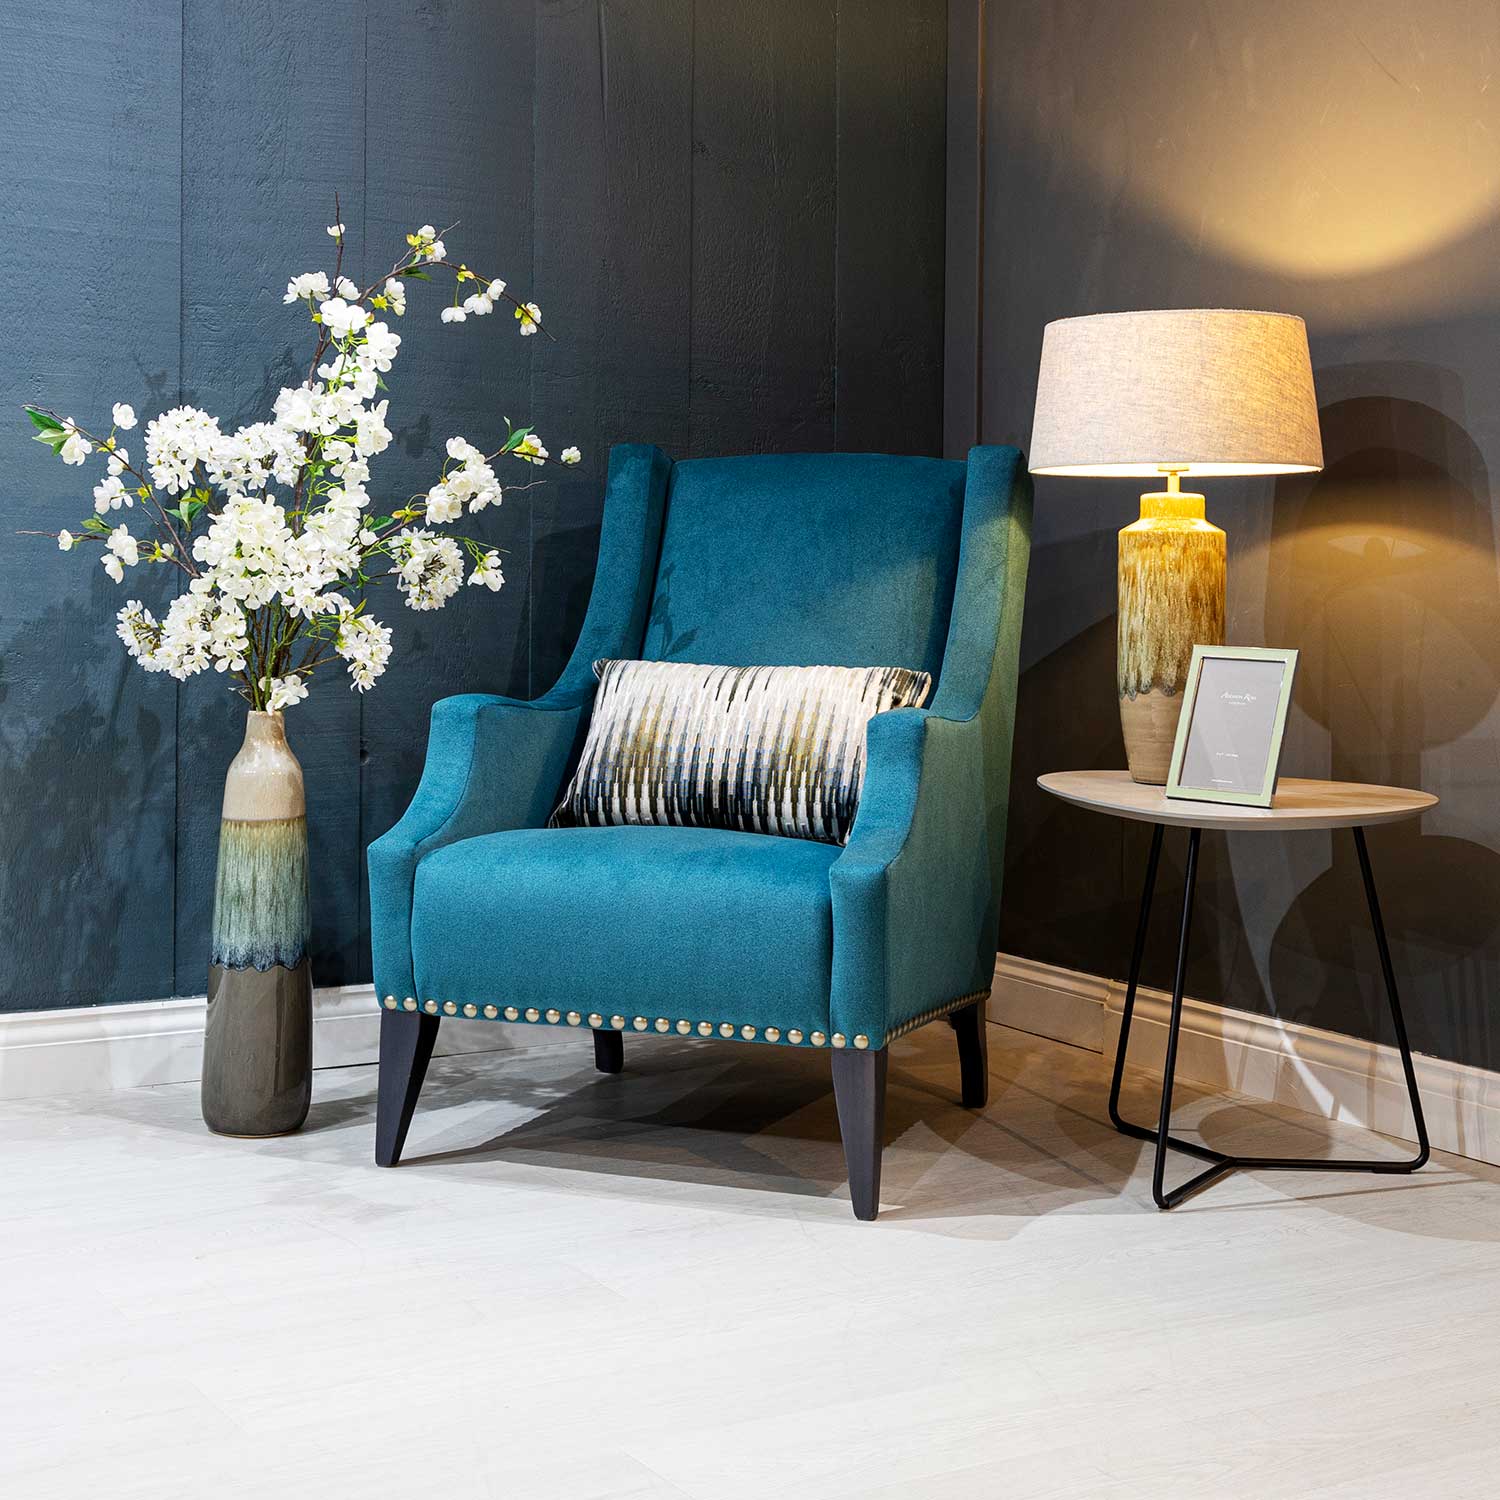 Linden slim armchair in blue velvet on display at New England Home Interiors